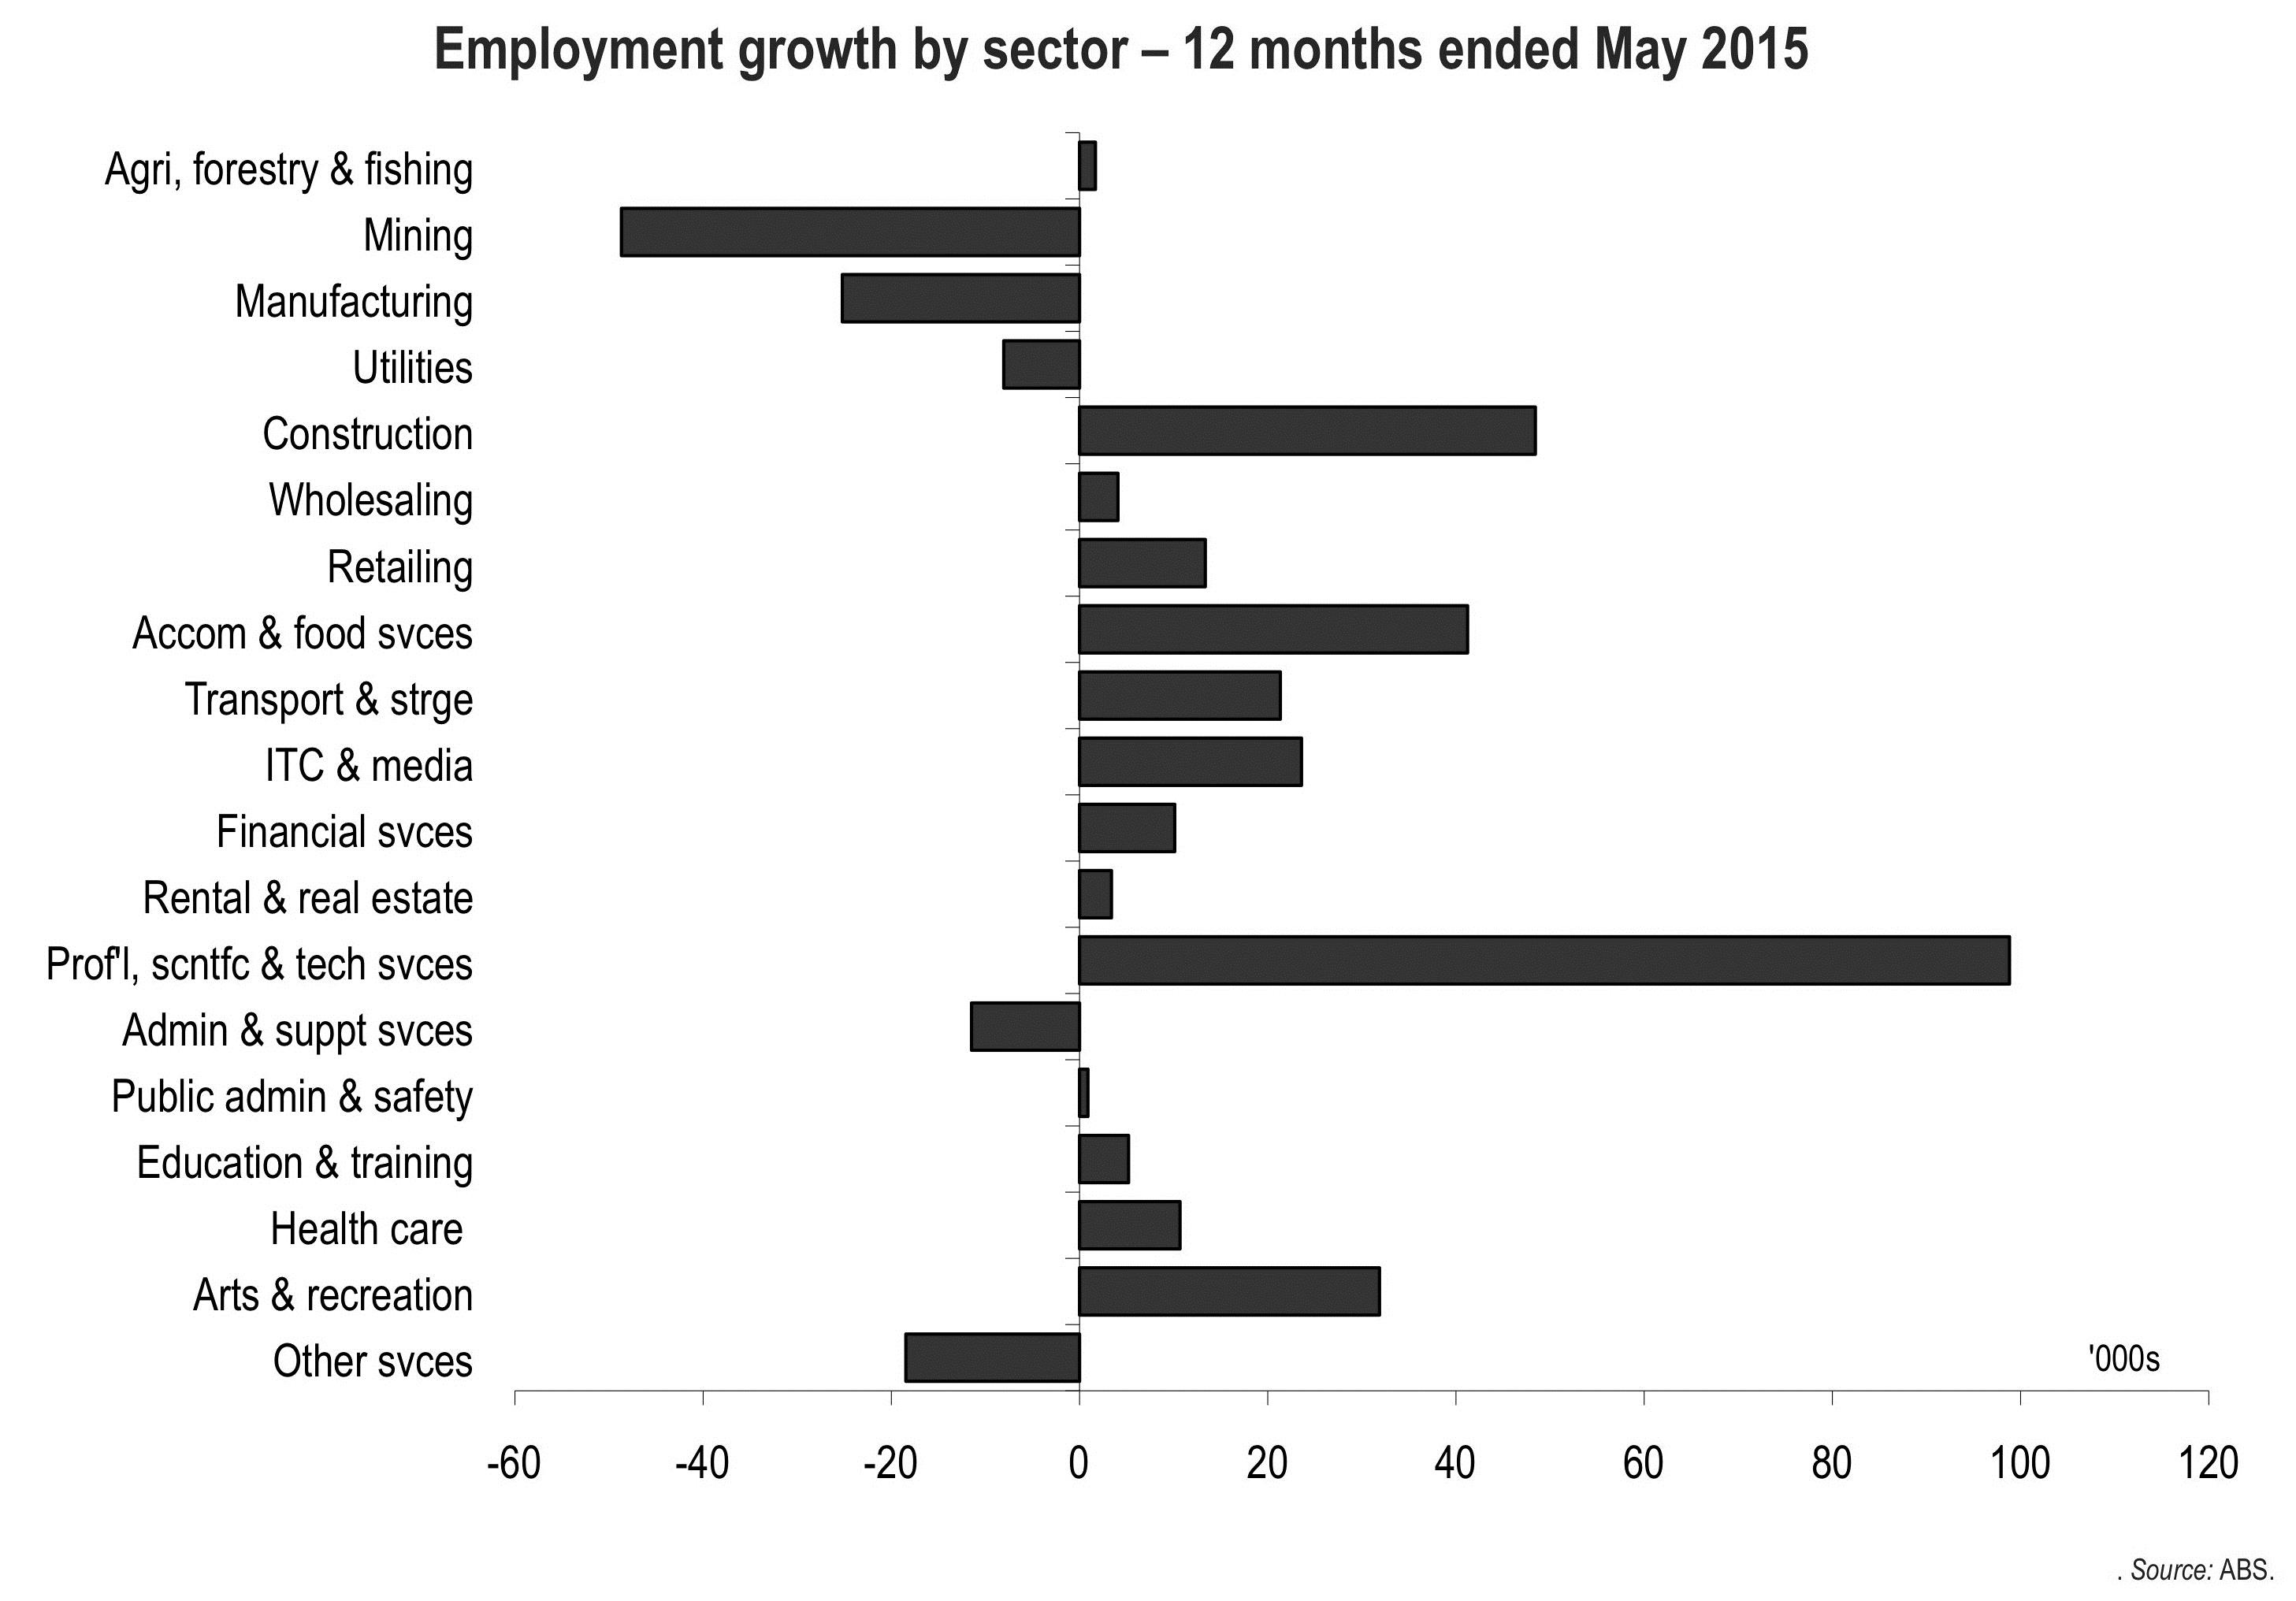 Figure 21: Employment growth by sector (12 months ended May 2015).